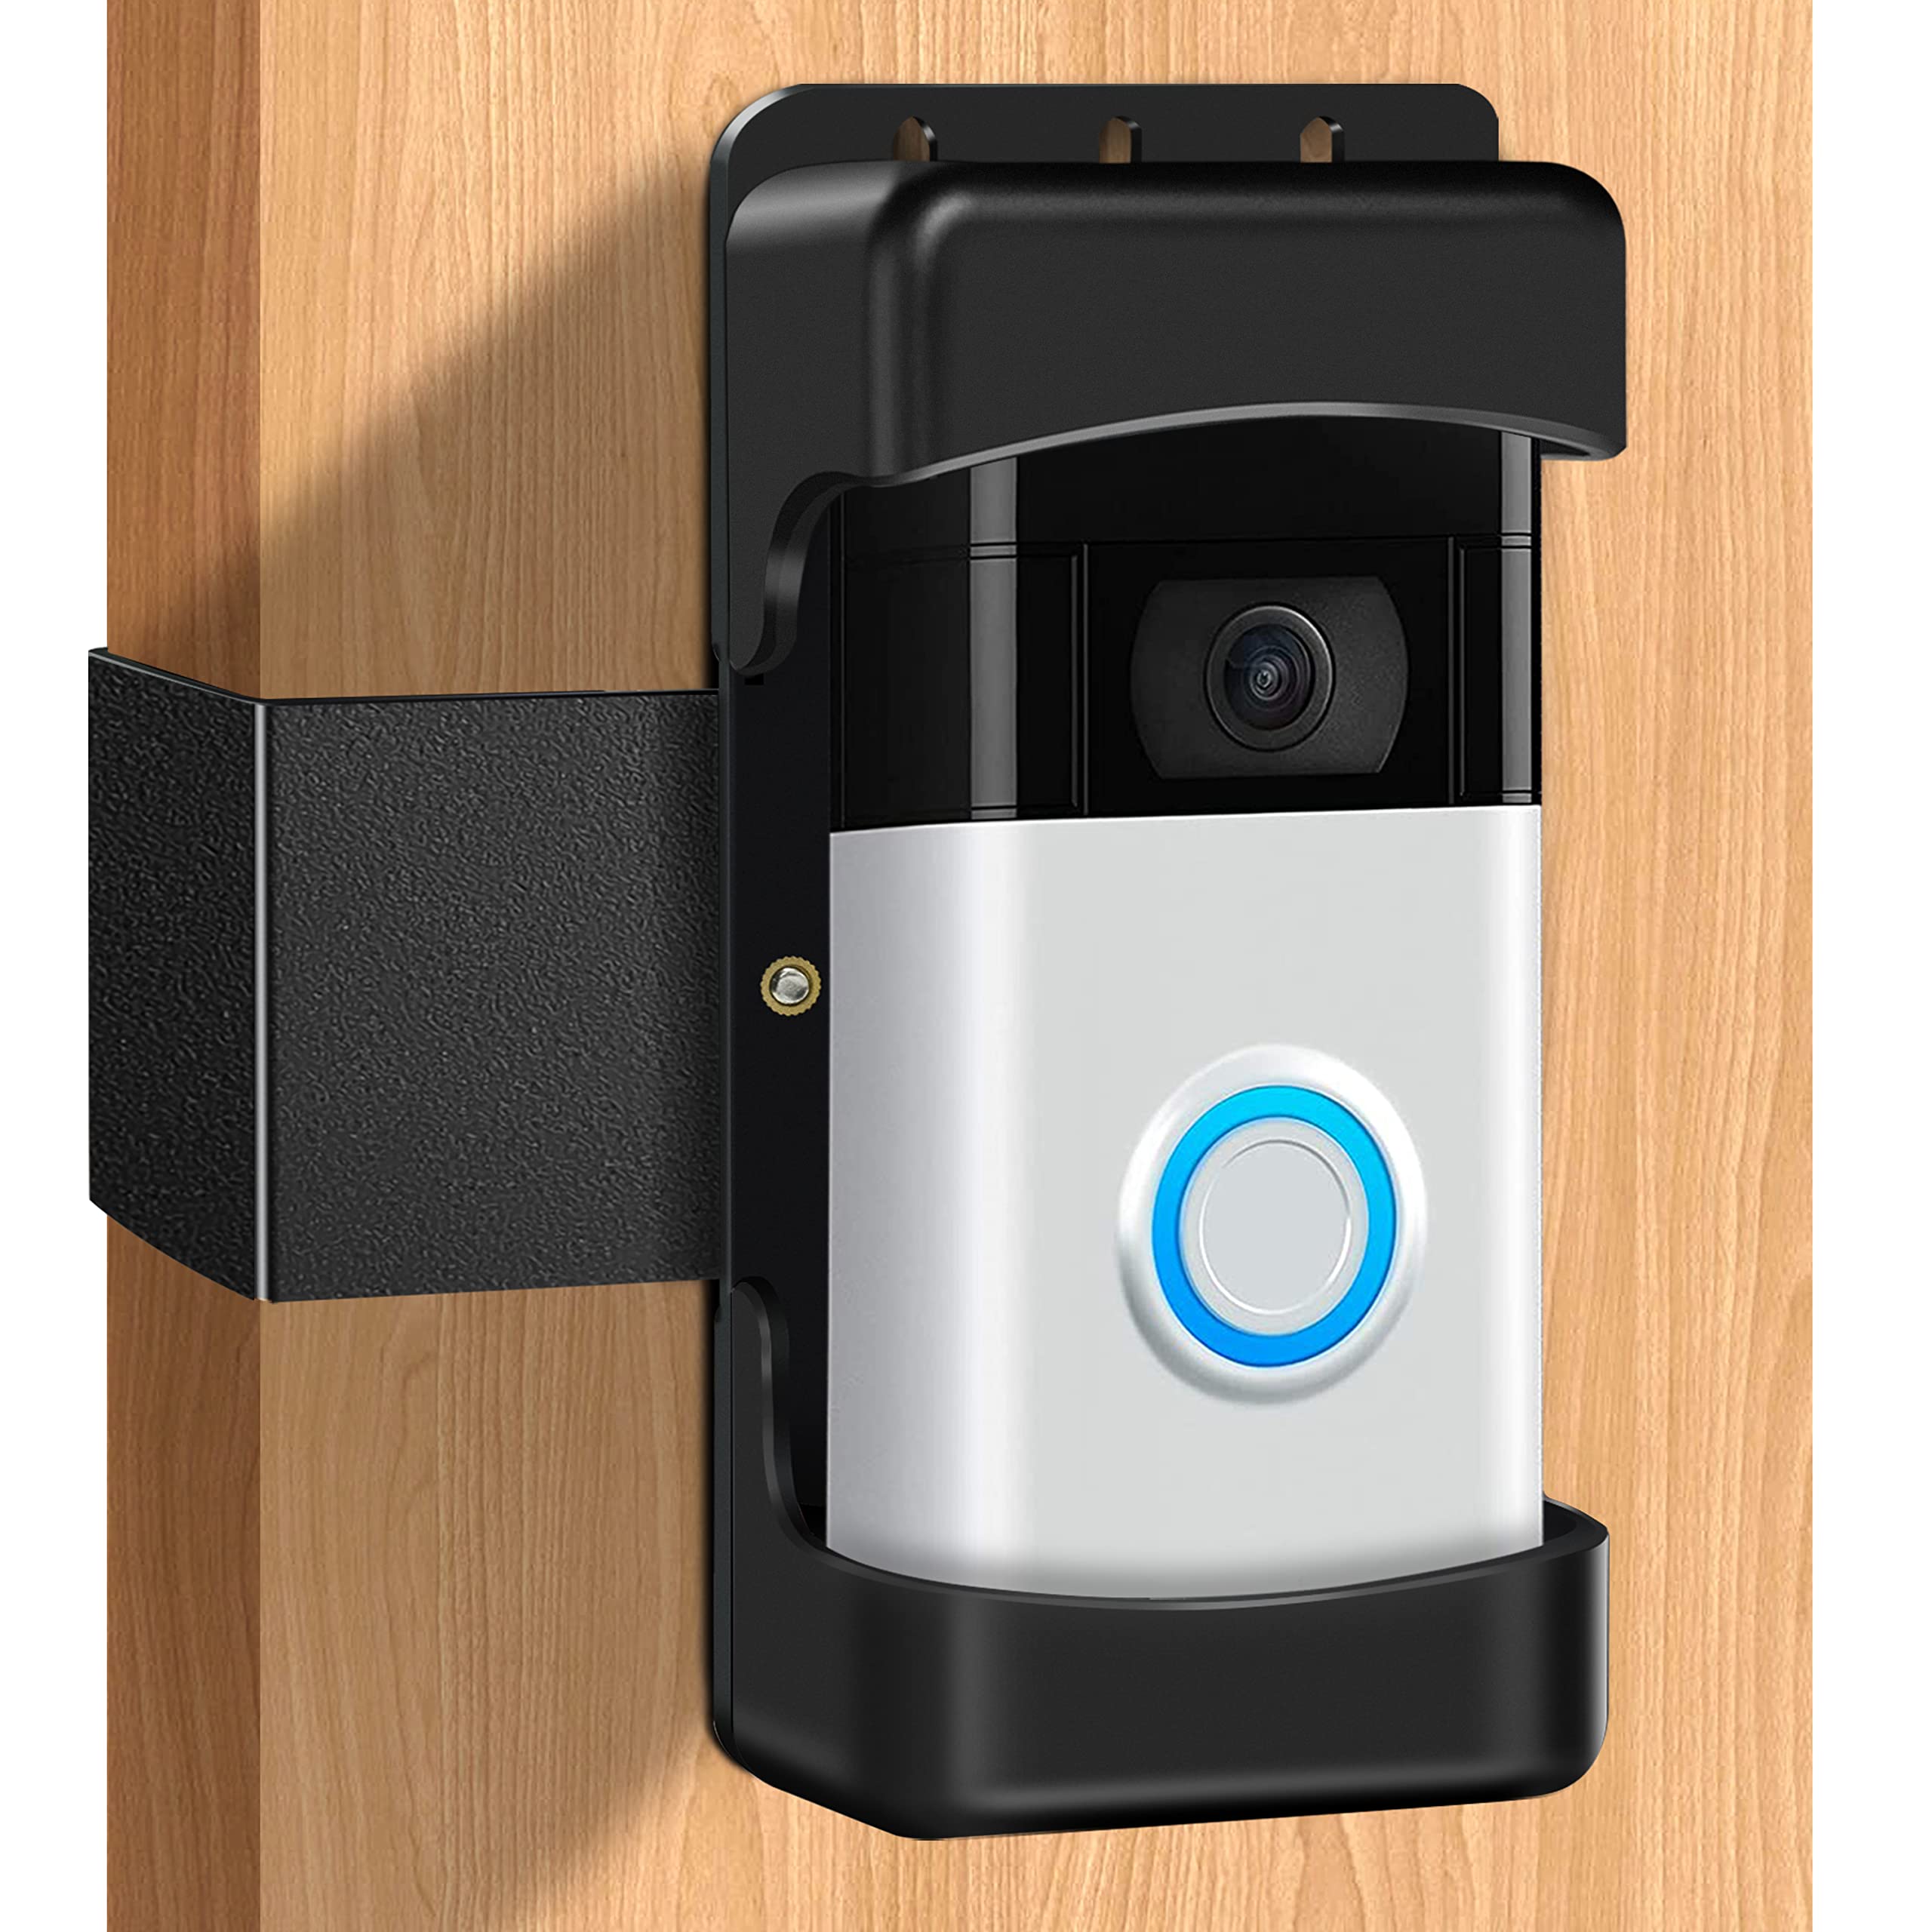 Which Ring Doorbell is Best for an Apartment